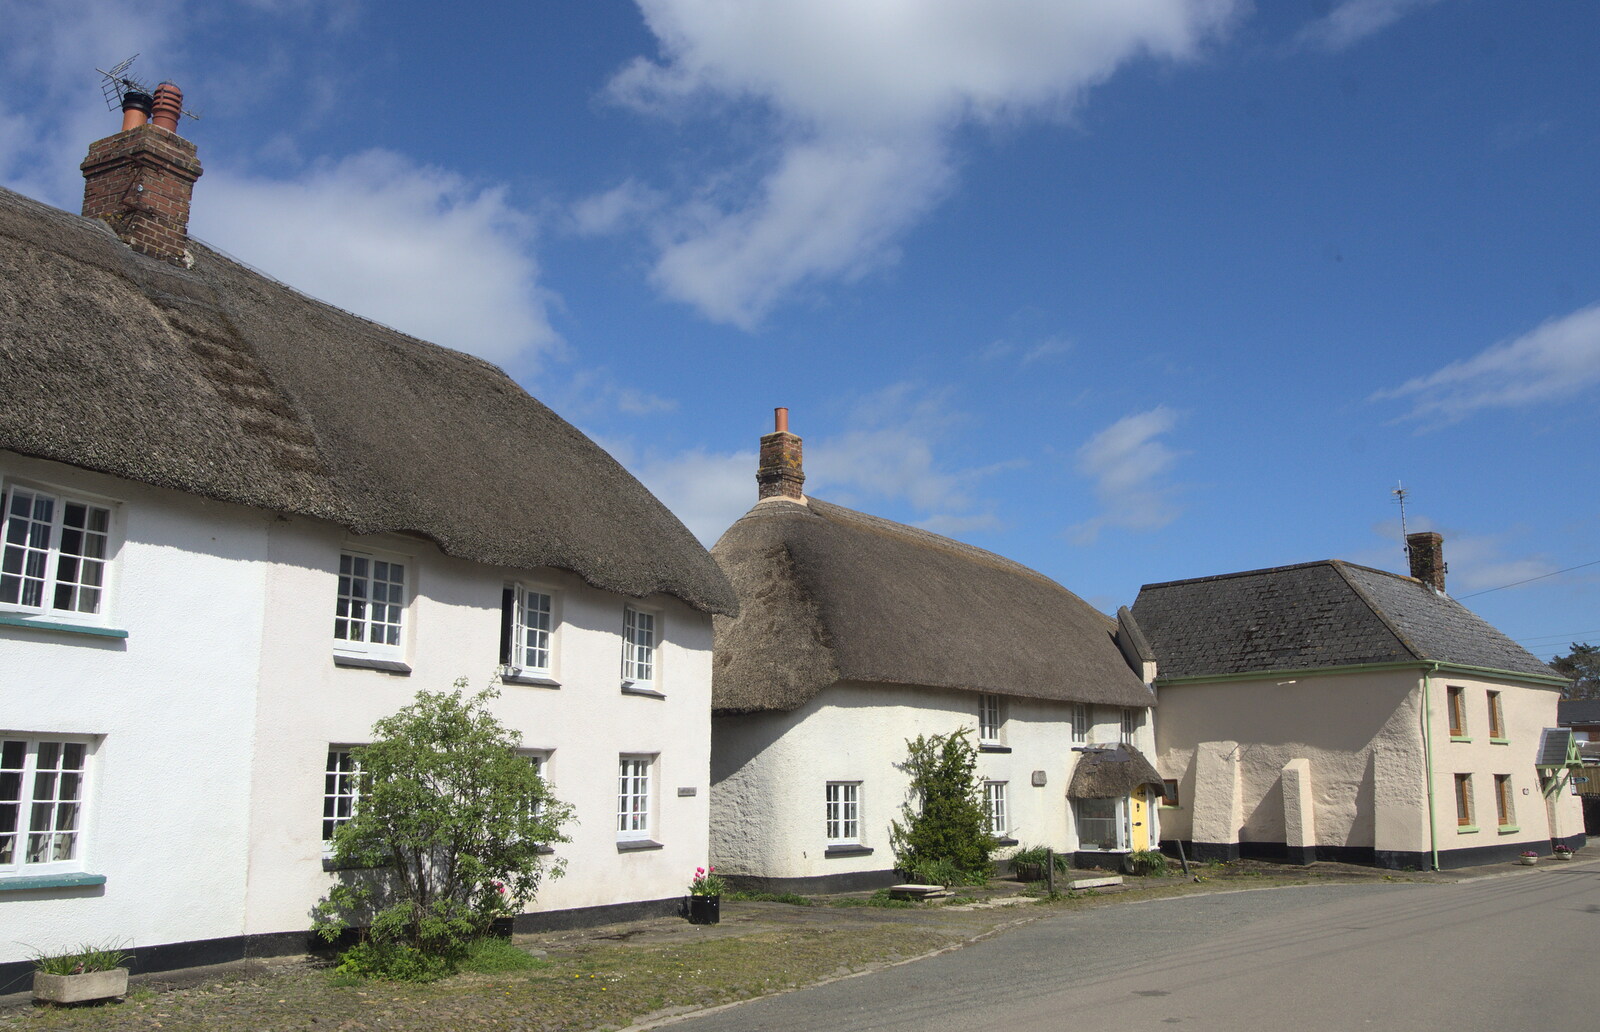 Thatched cottages in Spreyton from Grandma J's and a Day on the Beach, Spreyton and Exmouth, Devon - 13th April 2017